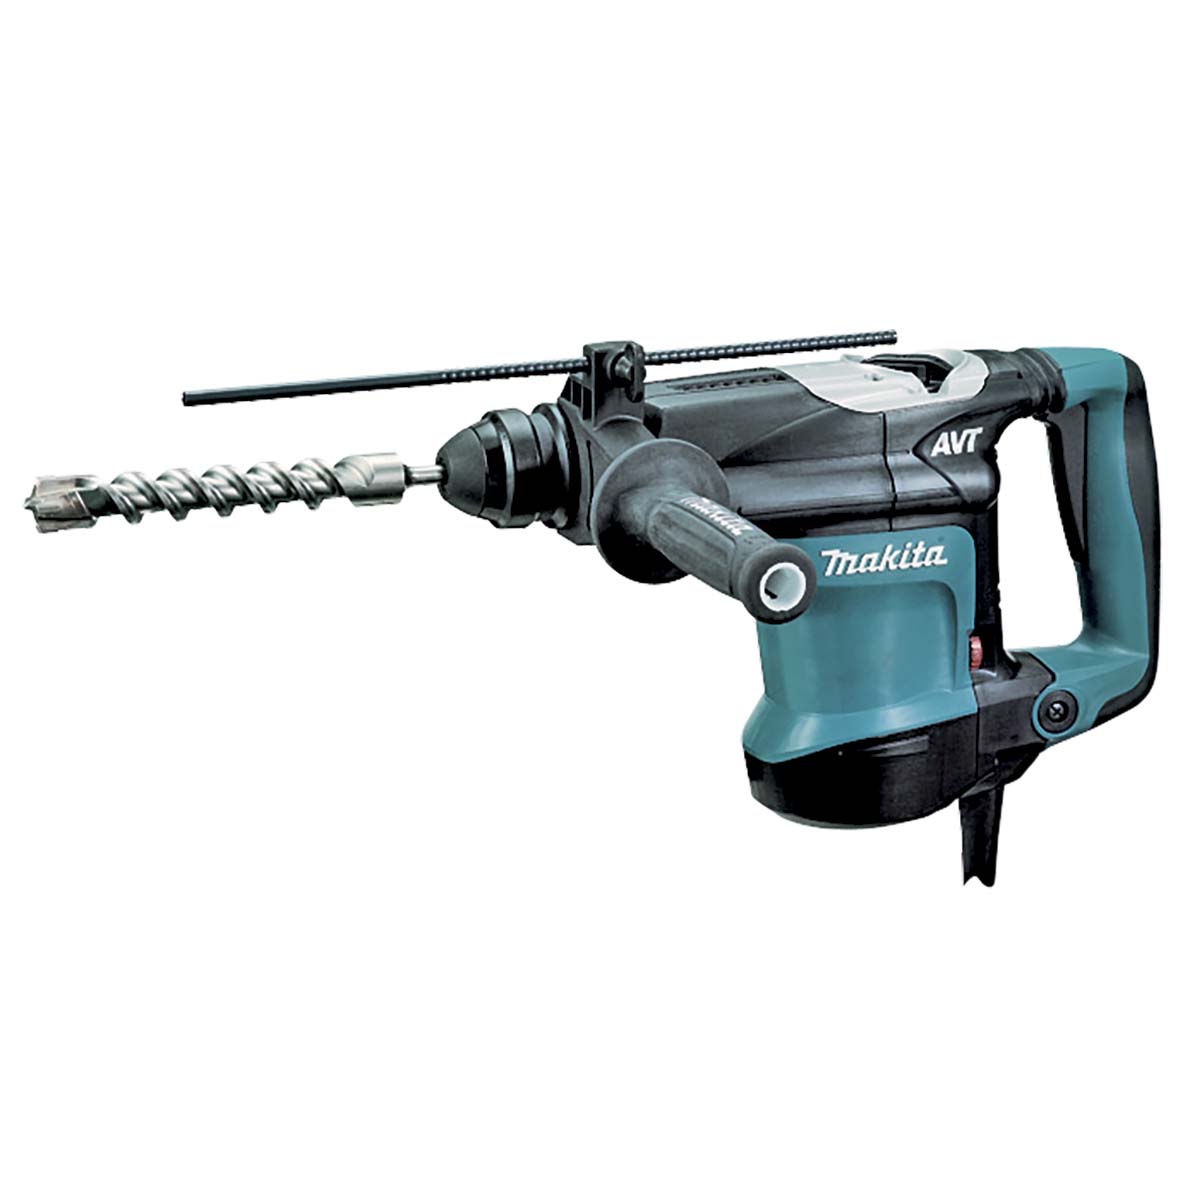 850W 32mm SDS-Plus Rotary Hammer HR3210C by Makita